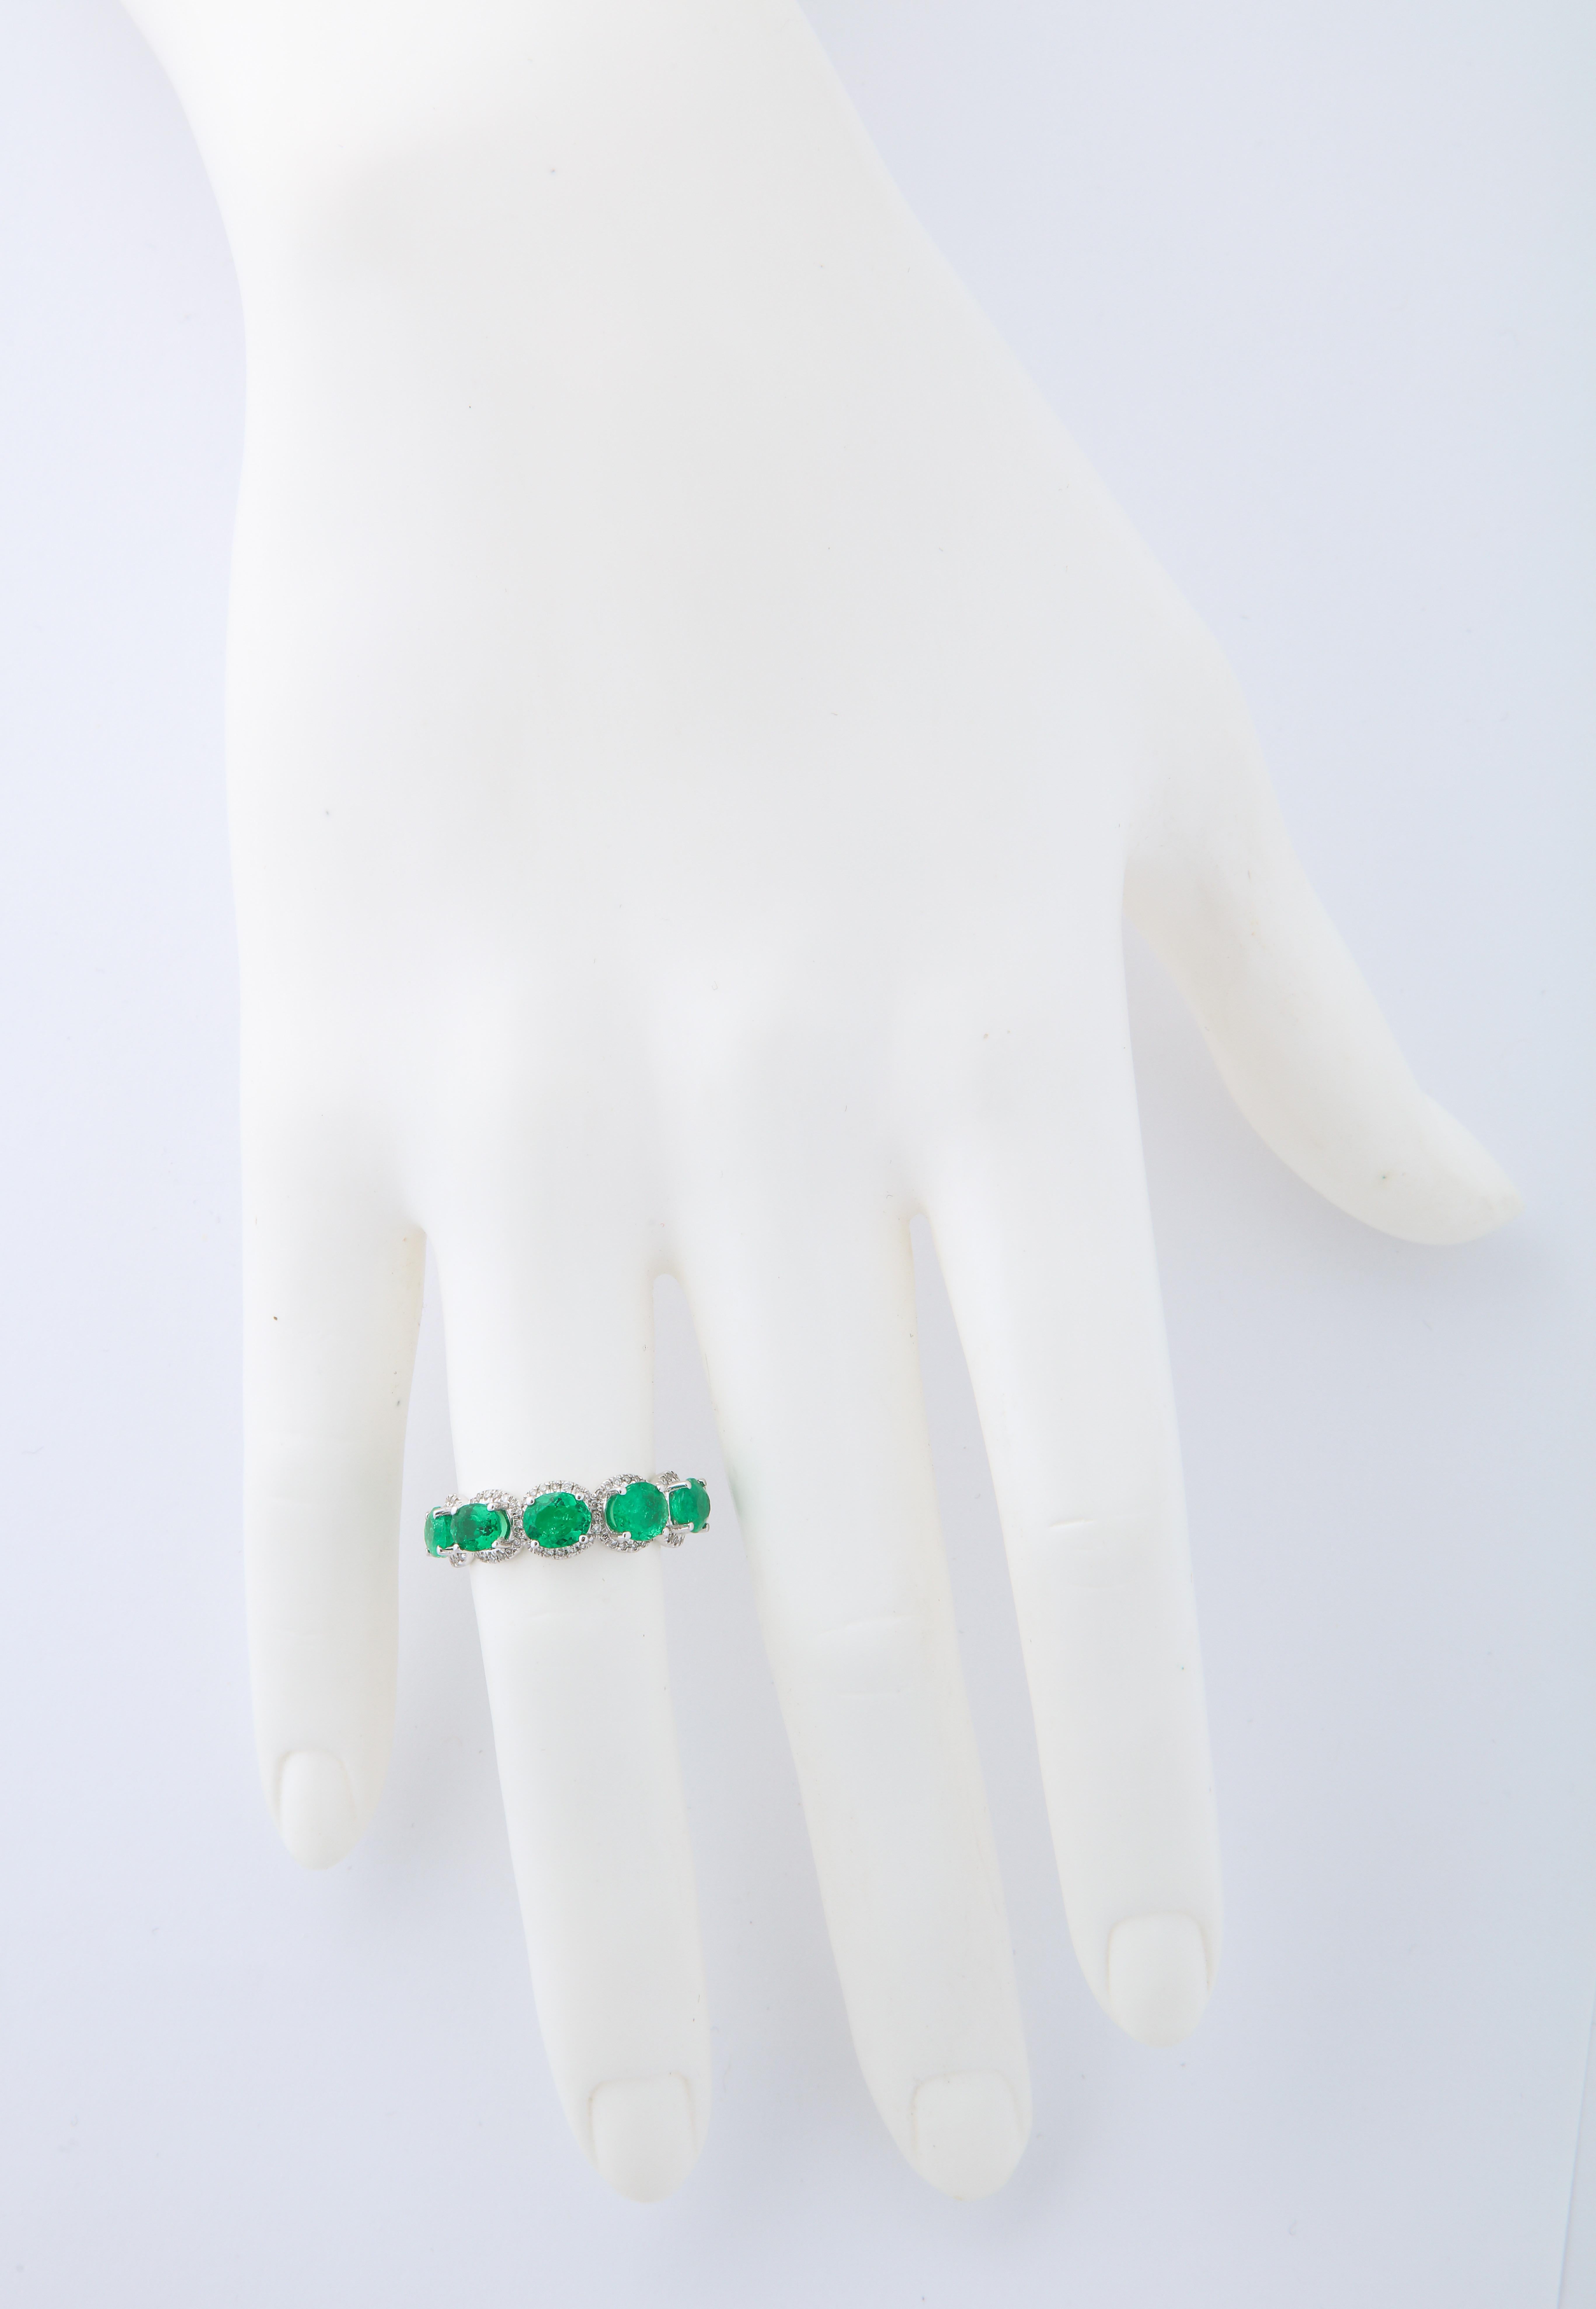 18kt white gold oval emerald (10=3.59cts) and diamond (0.44cts) eternity band.  This ring is destined to become a staple in anyone's jewelry collection and the micro pavé diamond halo setting around each emerald makes all the difference.  Just the